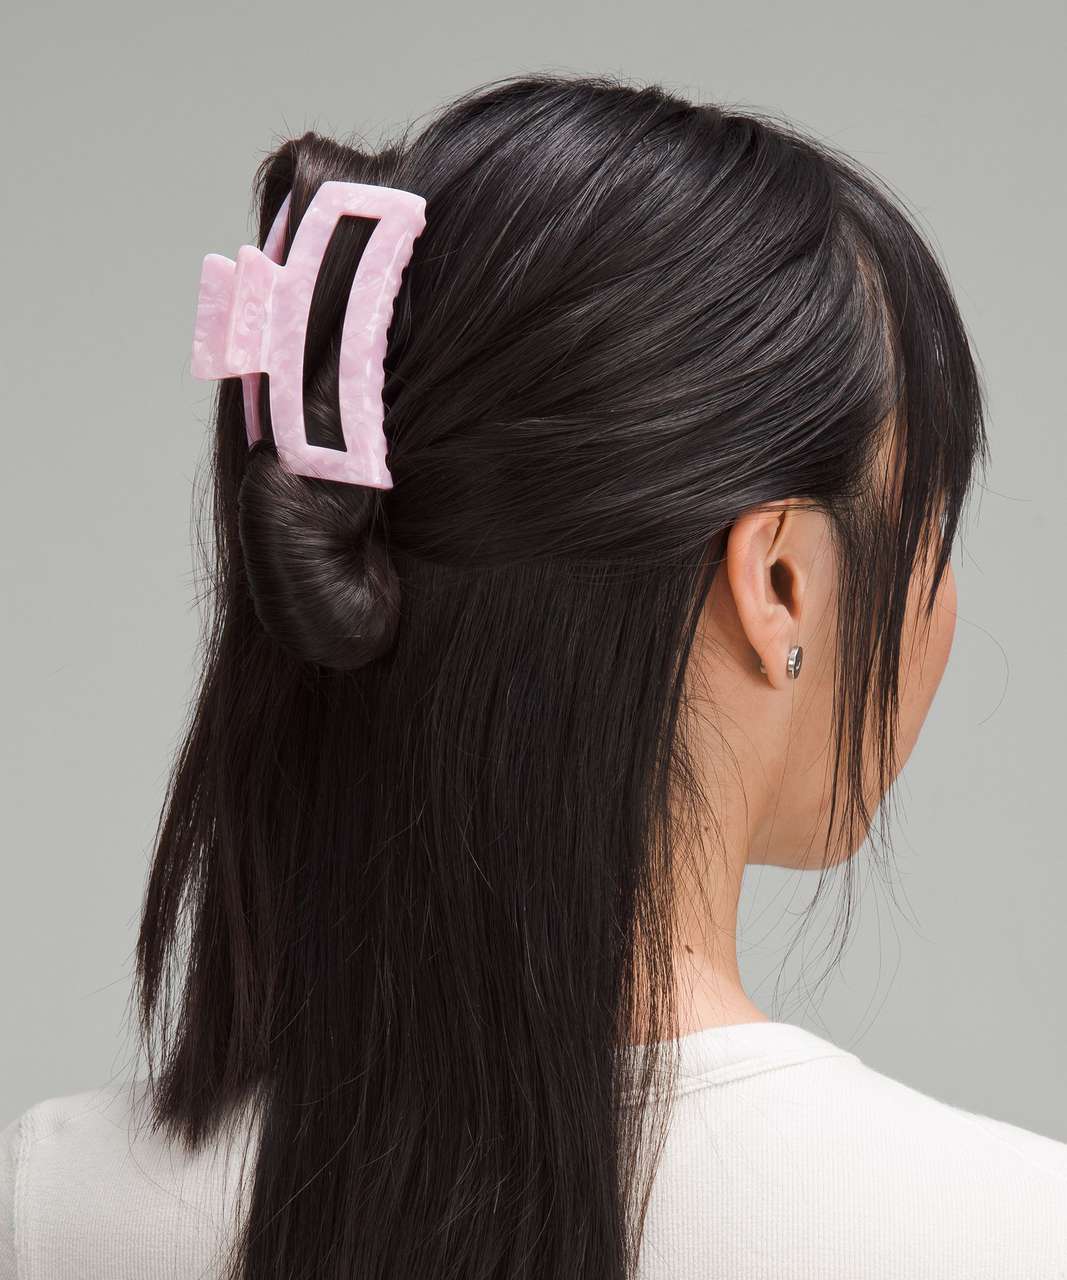 Lululemon Claw Hair Clips Set *4 Pack - Pink Parfait / Pink Peony / Brown Earth / Gleam / Black / White / Black / Roasted Brown / Black / Roasted Brown